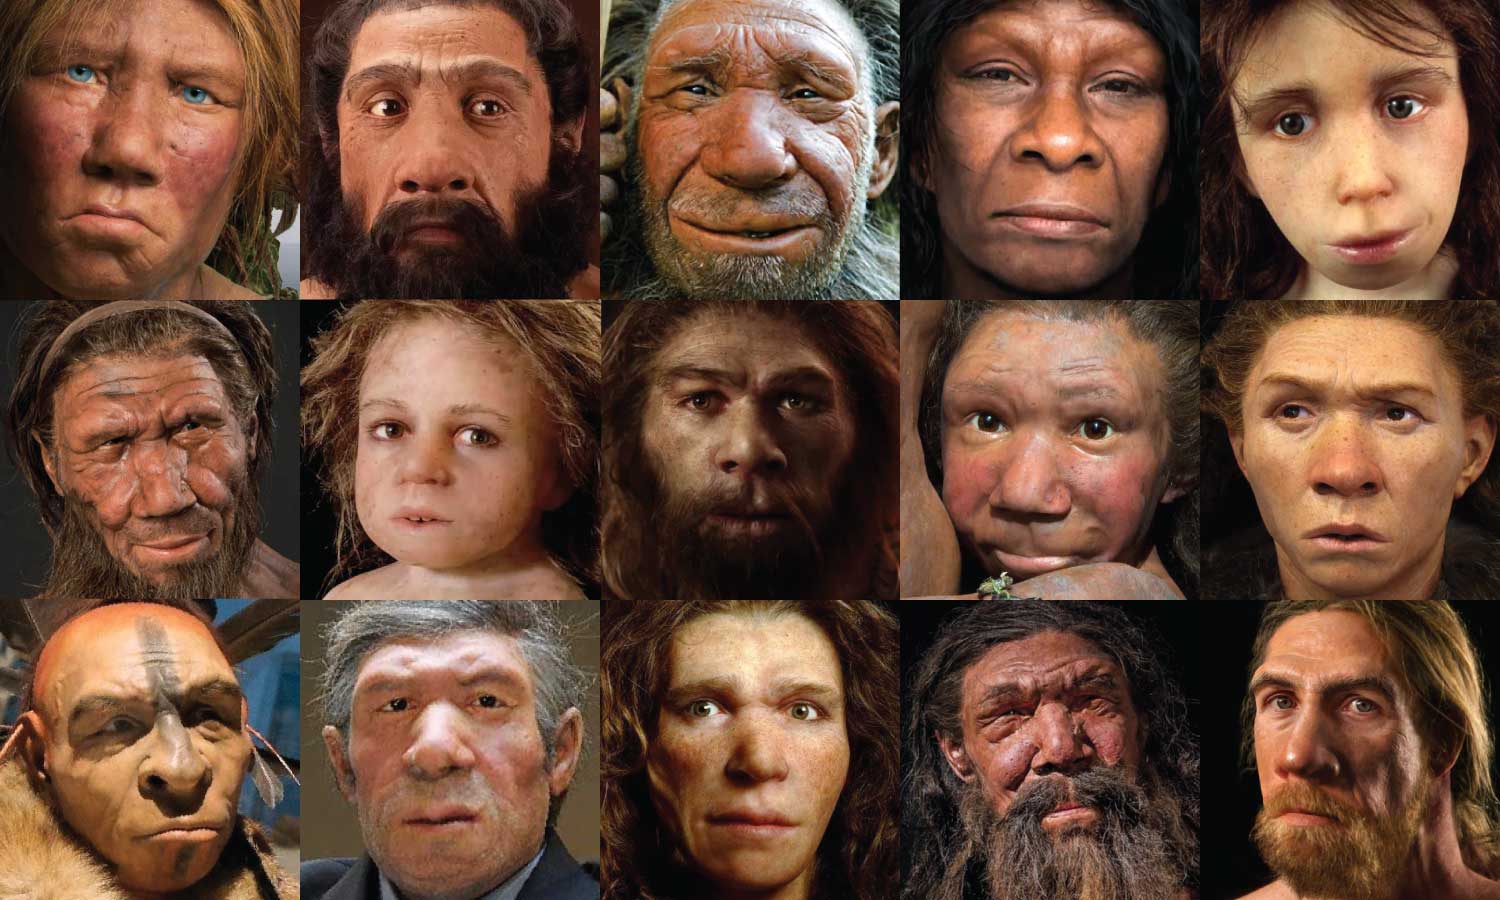 Dutch Neanderthal's Face Revealed